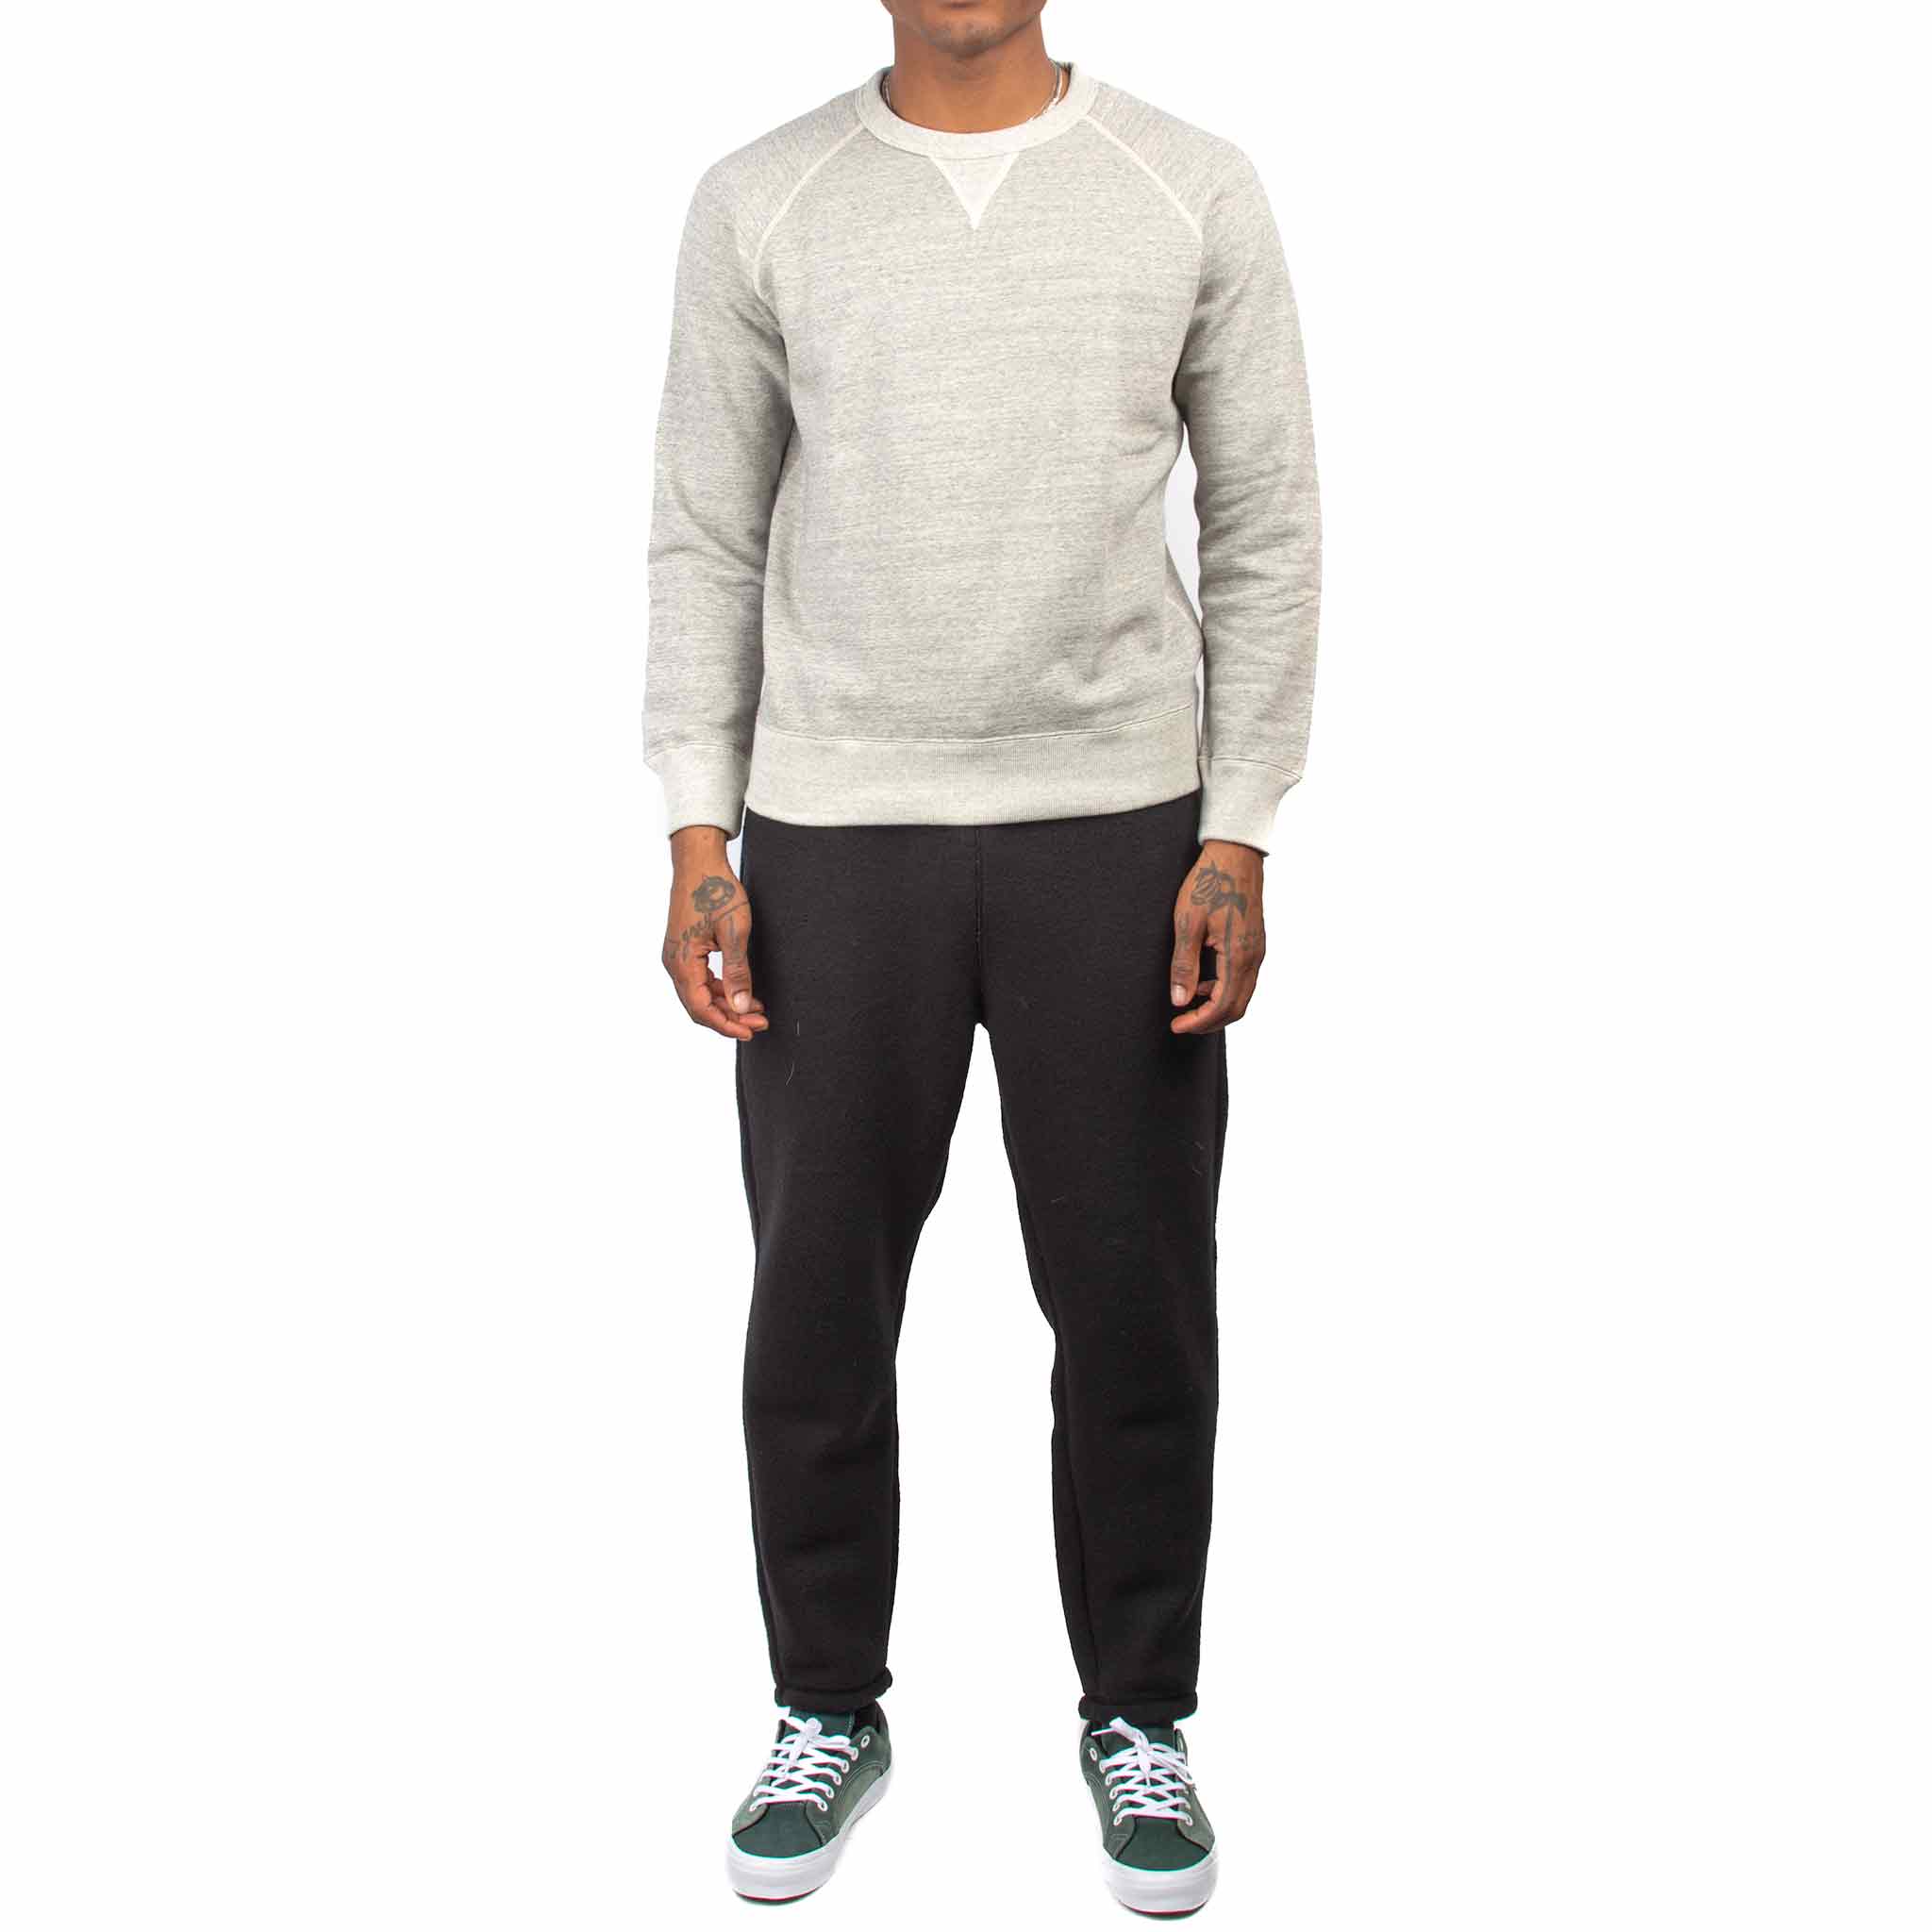 The Real McCoy's MC21102 Trousers, Cold Weather, Fleece Black Model